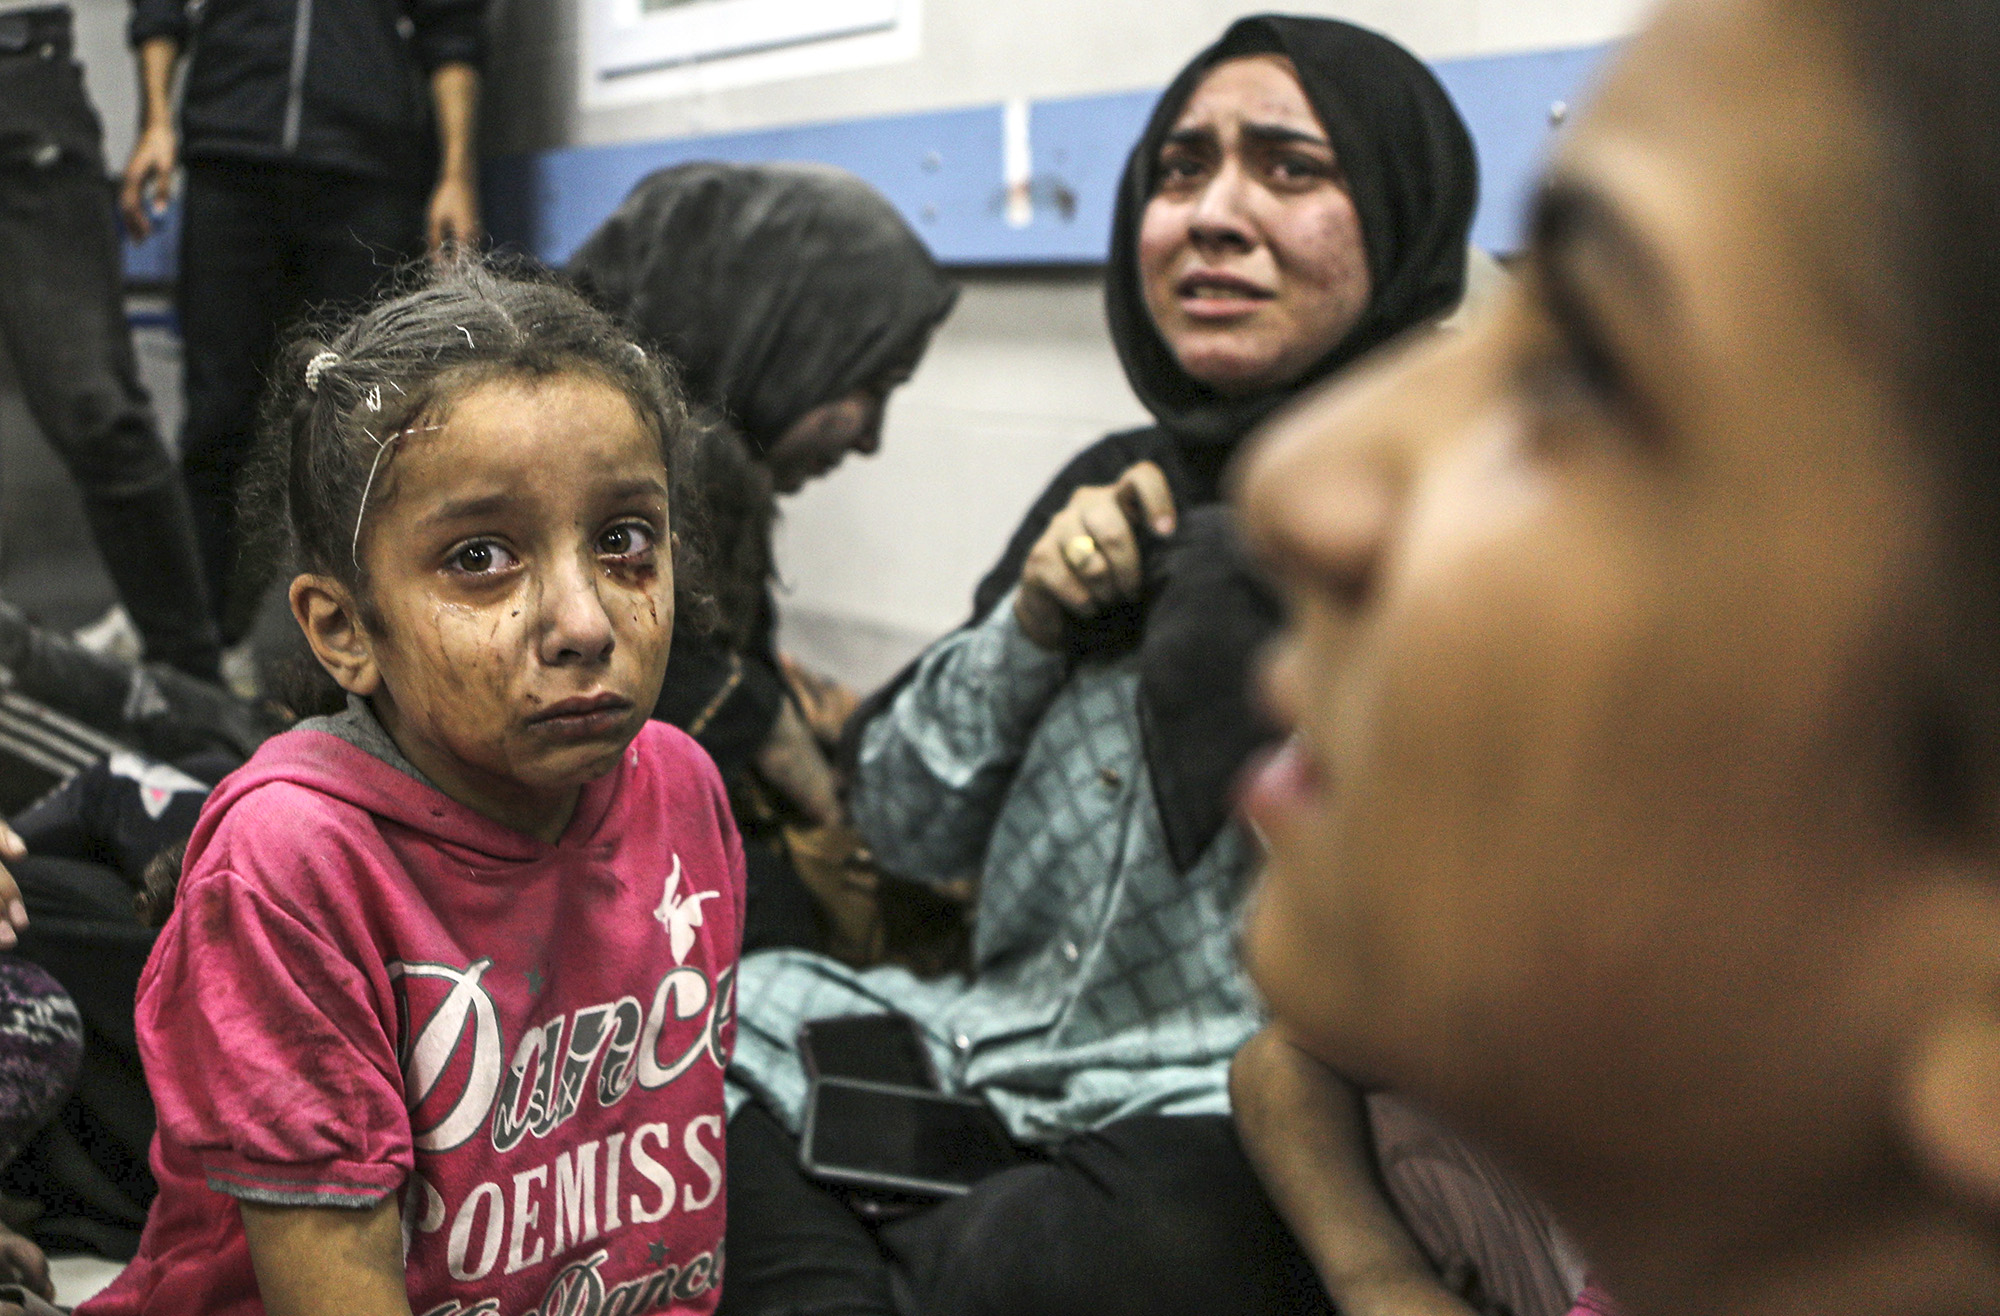 Wounded Palestinians sit in al-Shifa hospital in Gaza City, central Gaza Strip, after arriving from al-Ahli hospital following an explosion there on October 17.